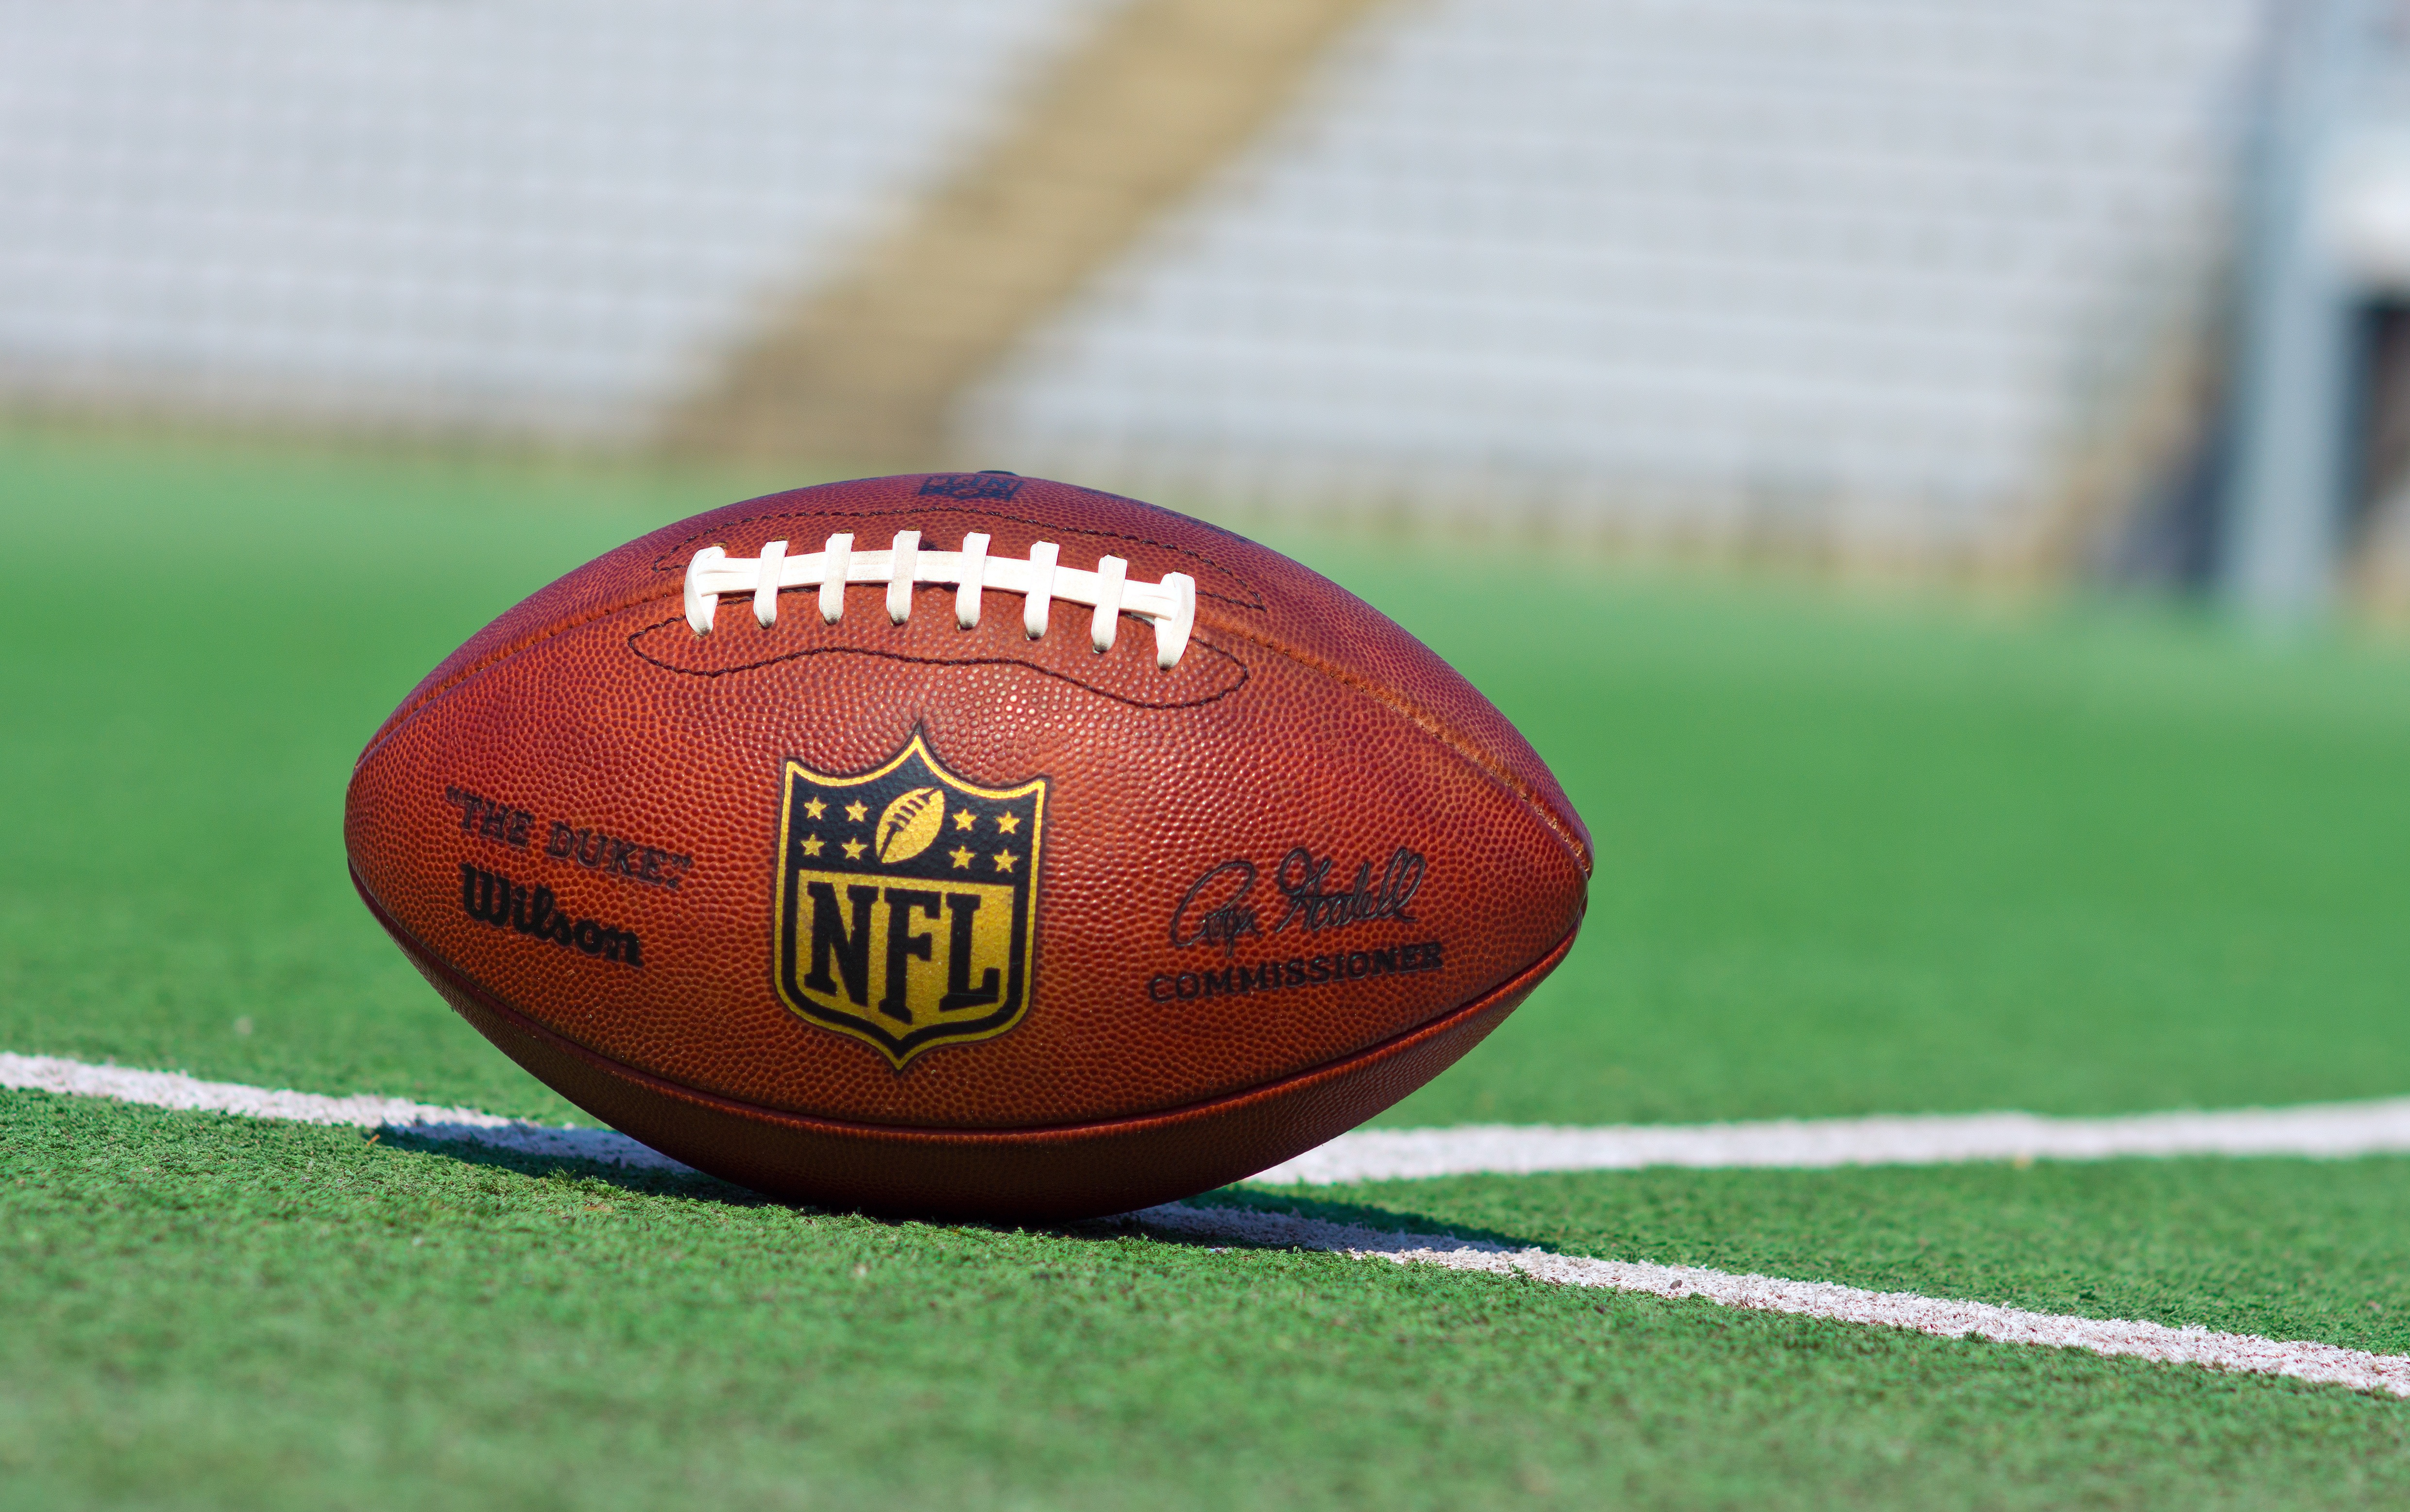 nfl games today on peacock tv